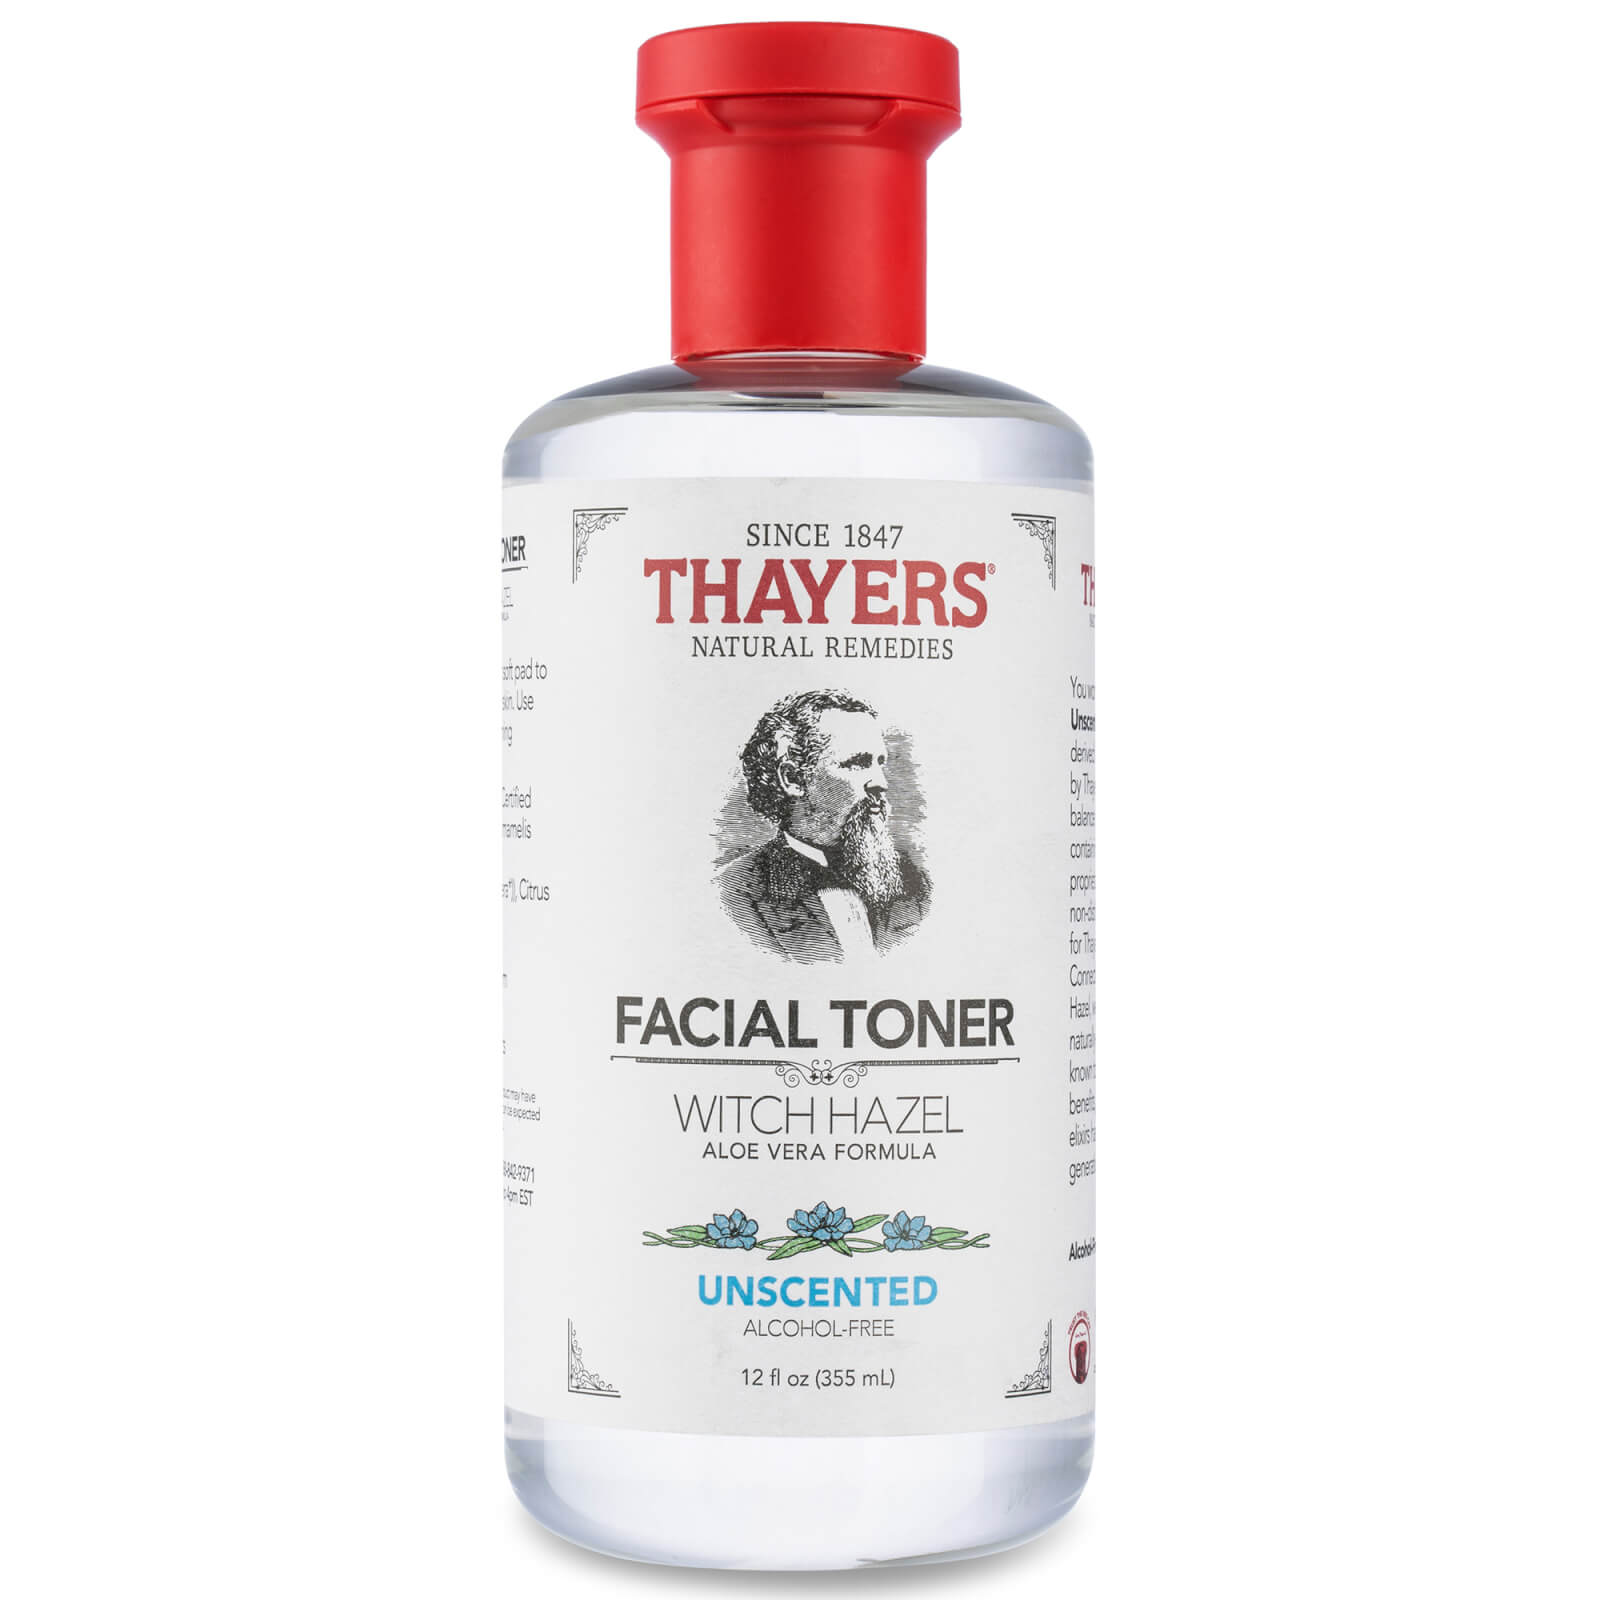 Thayers Natural Remedies Thayers Unscented Facial Toner 335ml